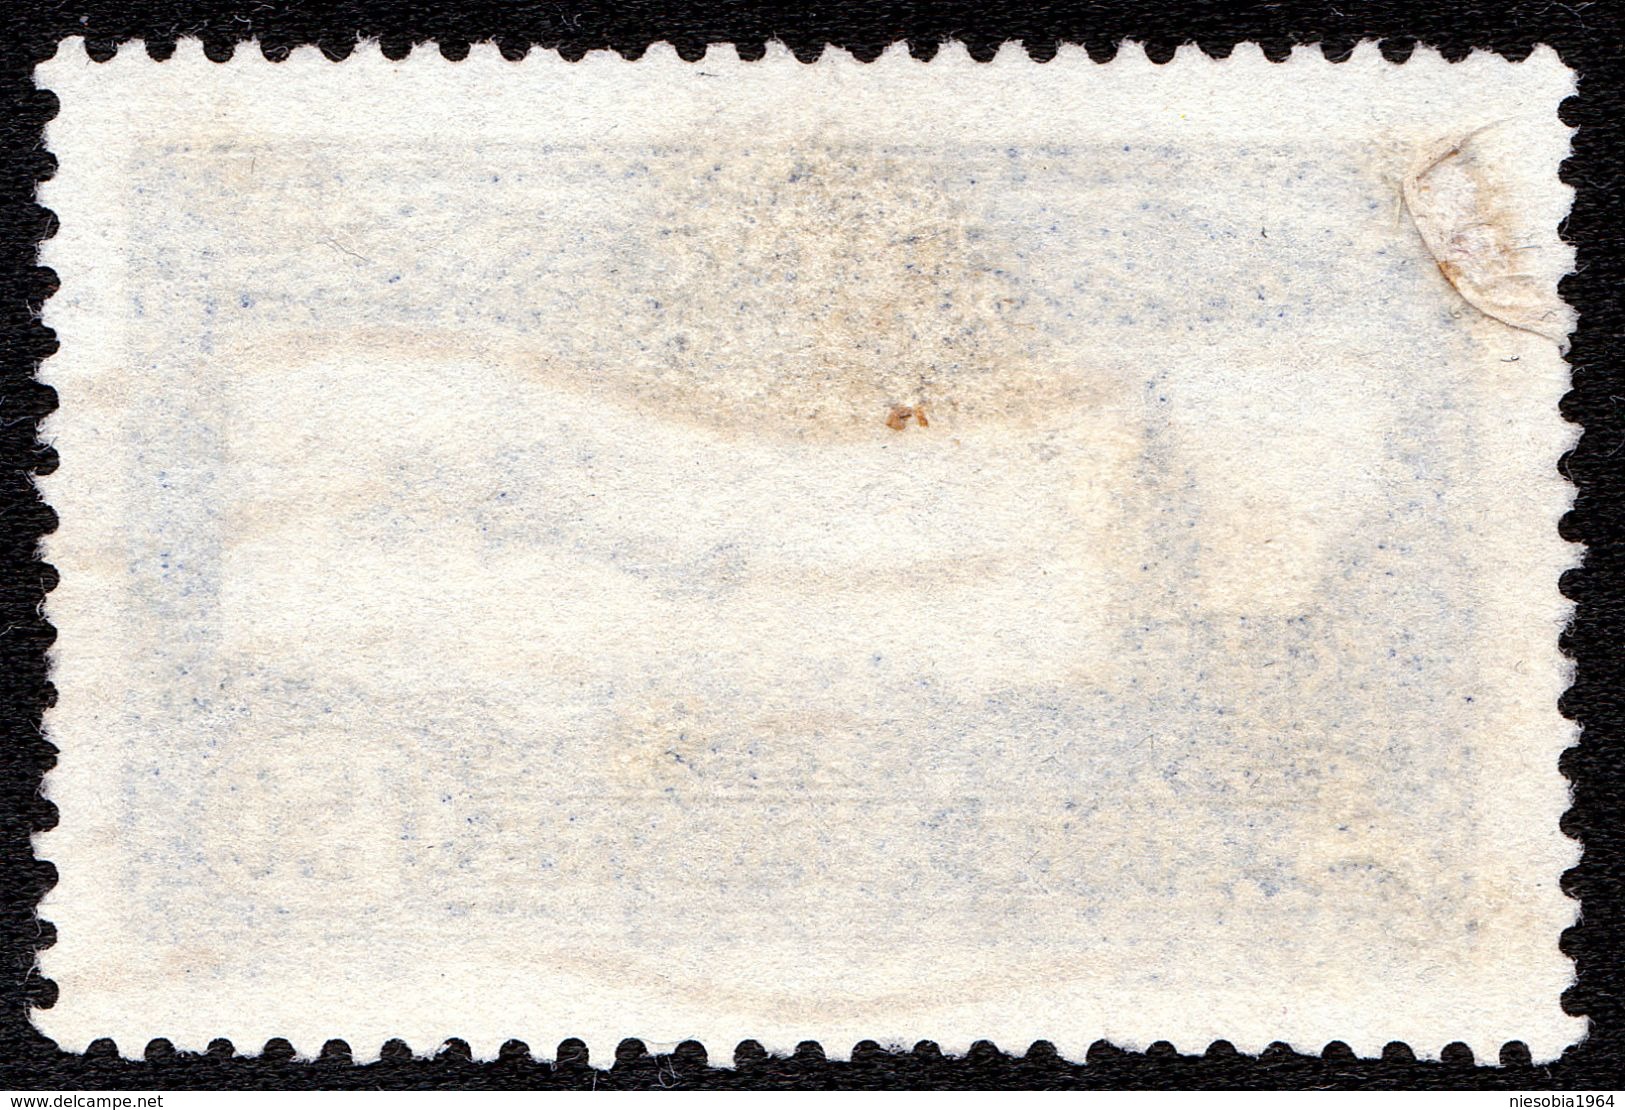 WW2 - France Stamp With Nazi Overprint -  BERLIN PARIS 1 F 50 Air Mail - Occupied France - Used Stamps